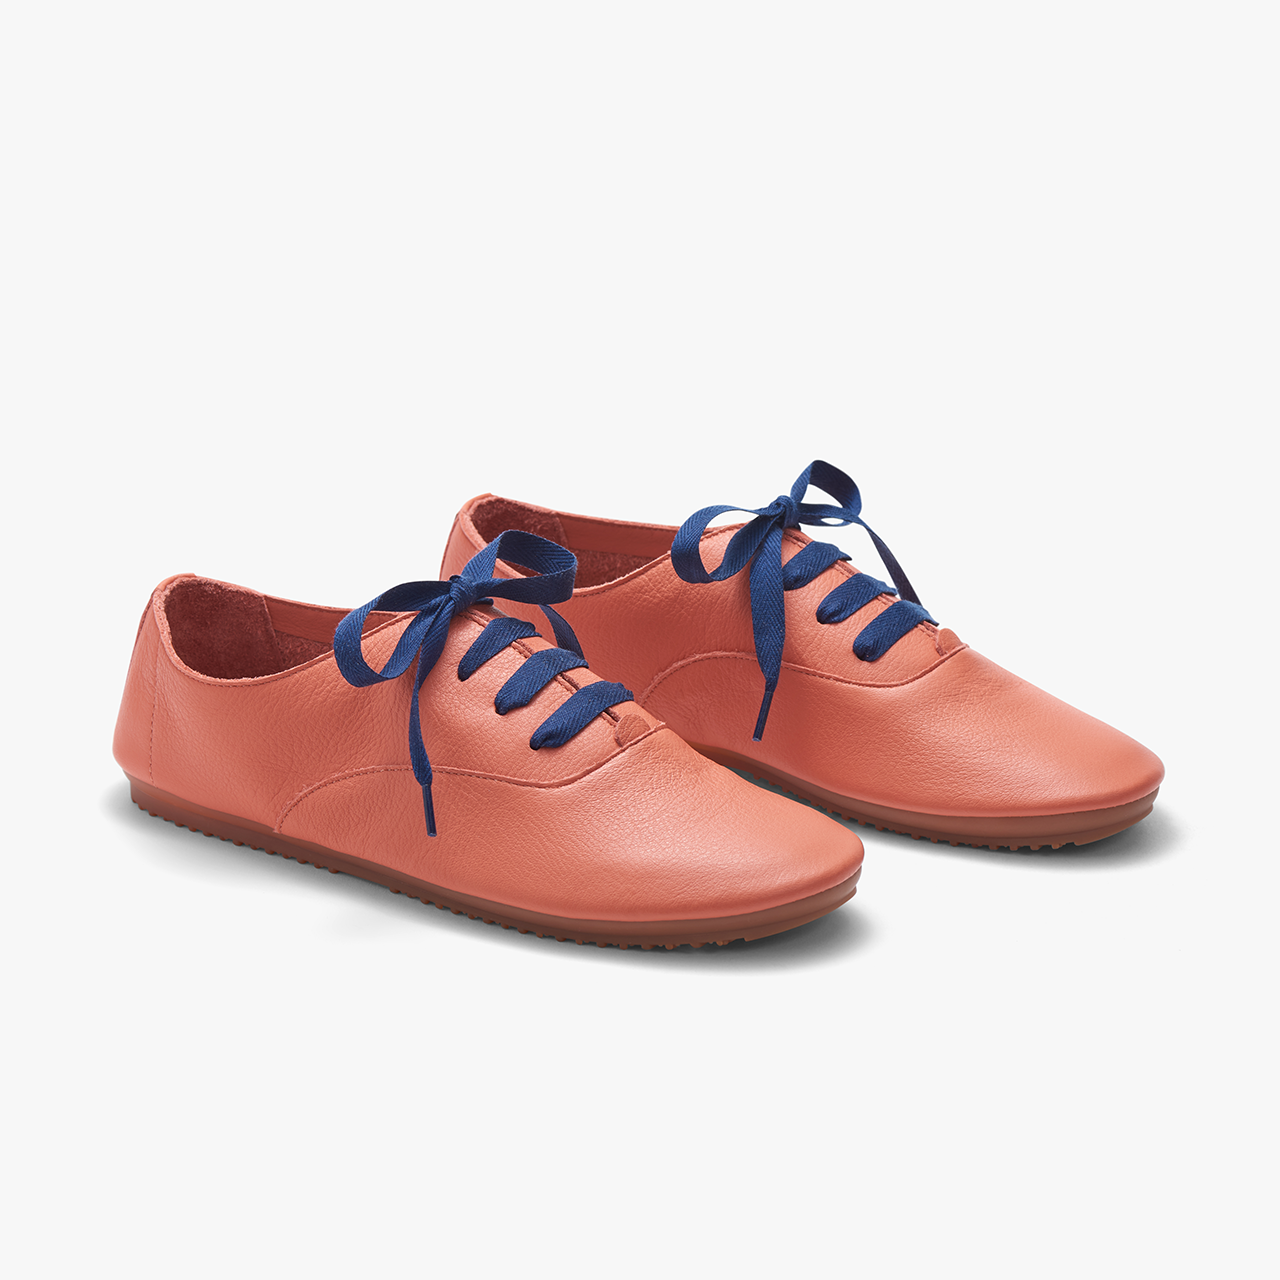 Burano - Coral – INTL Anothersole | Best Everyday Shoes